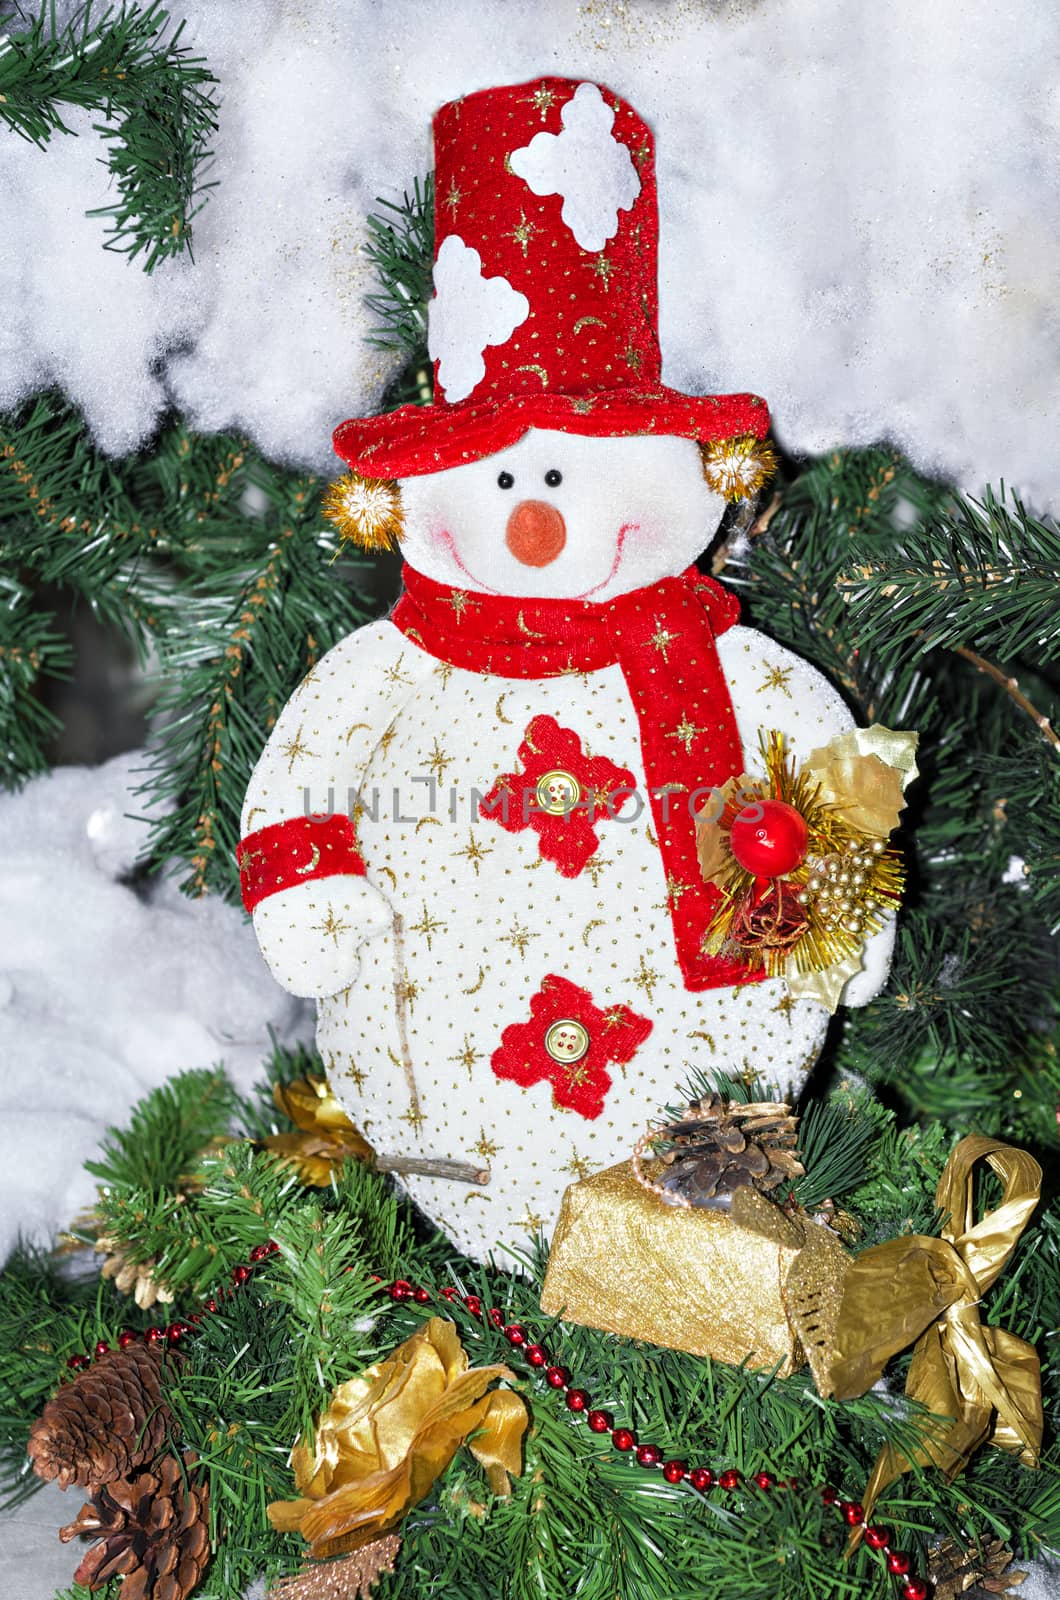 Toy snowman in red cap and scarf on the Christmas tree